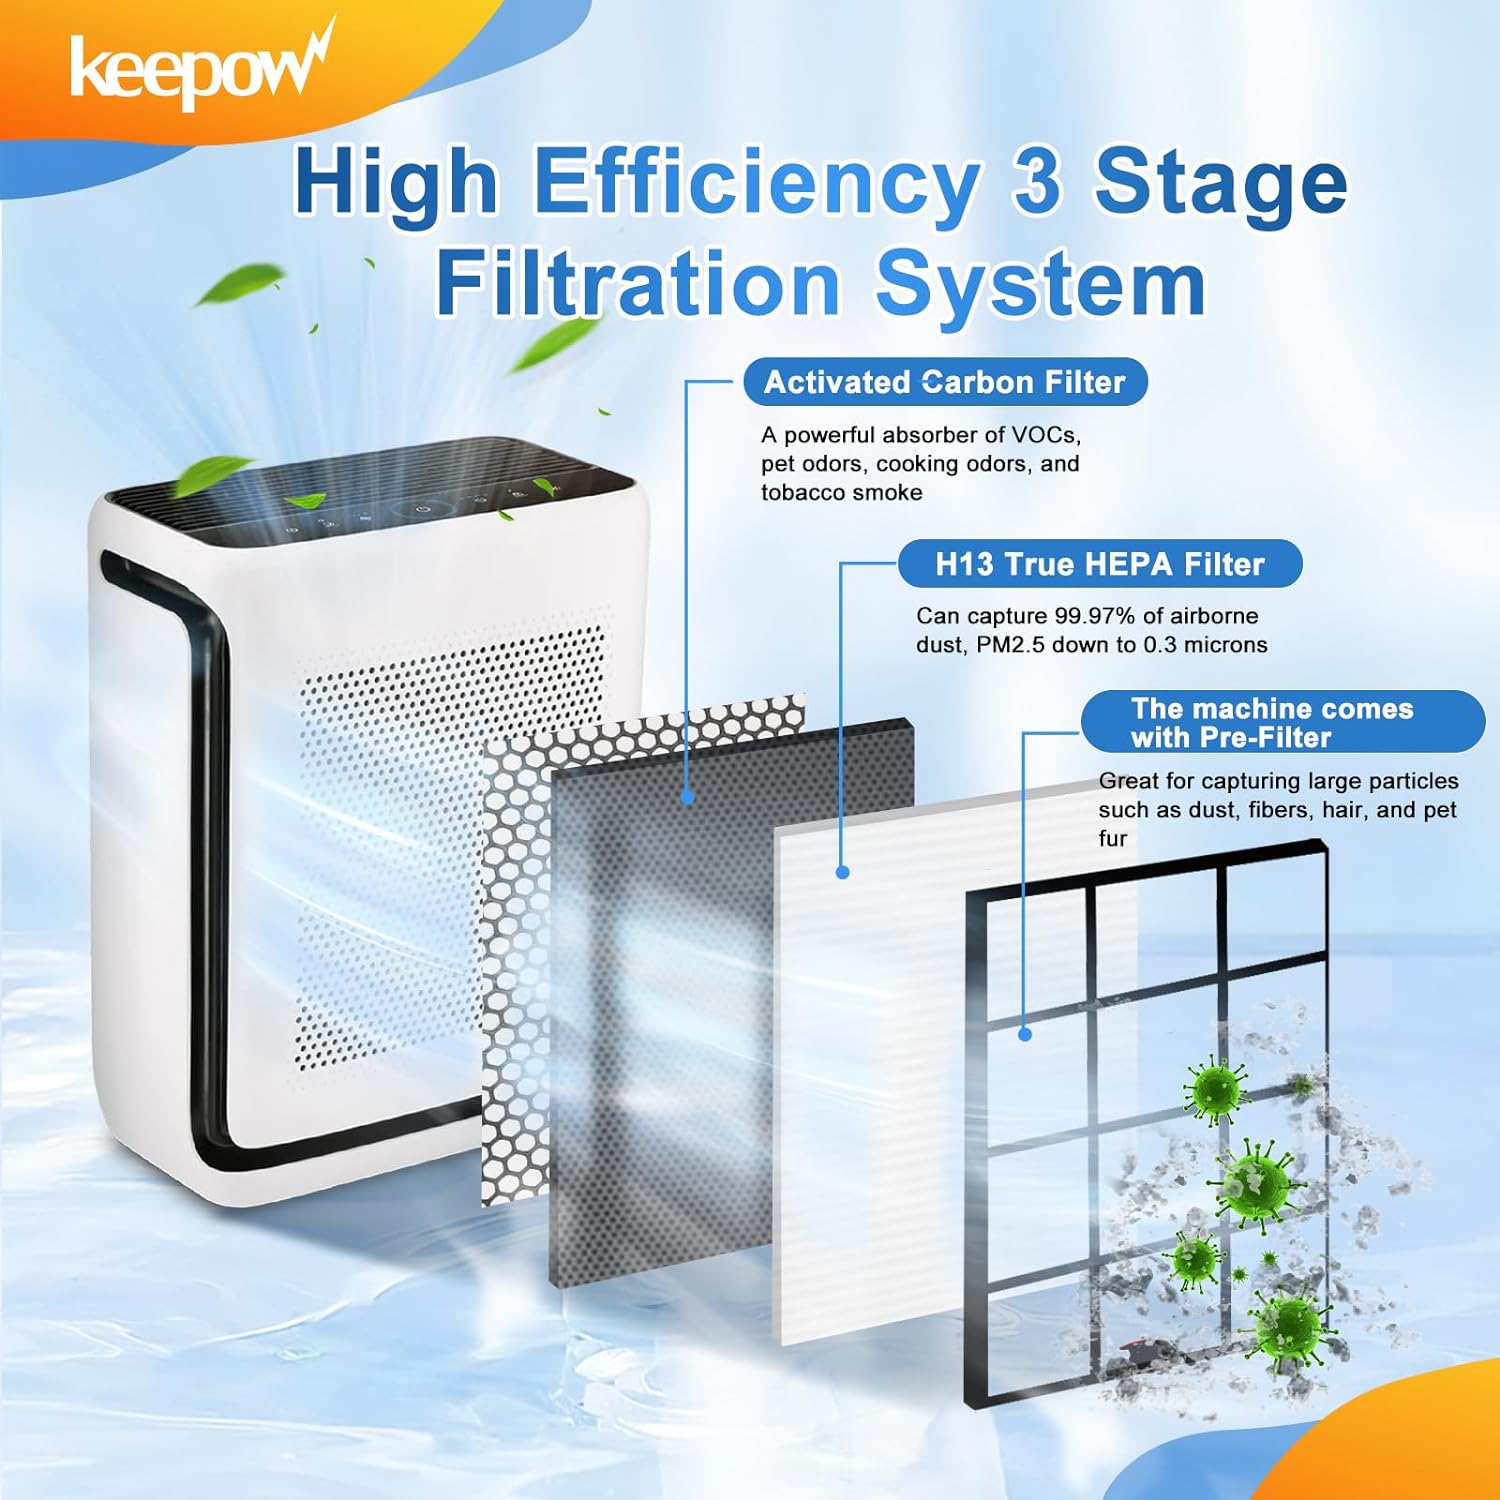 Keepow 3408F Air Filter for Vital 200S rf Smoke Remover Air Purifier Replacement Filters 3-in-1 H13 Ture HEPA and High-Efficiency Activated Carbon Filter Replace Part